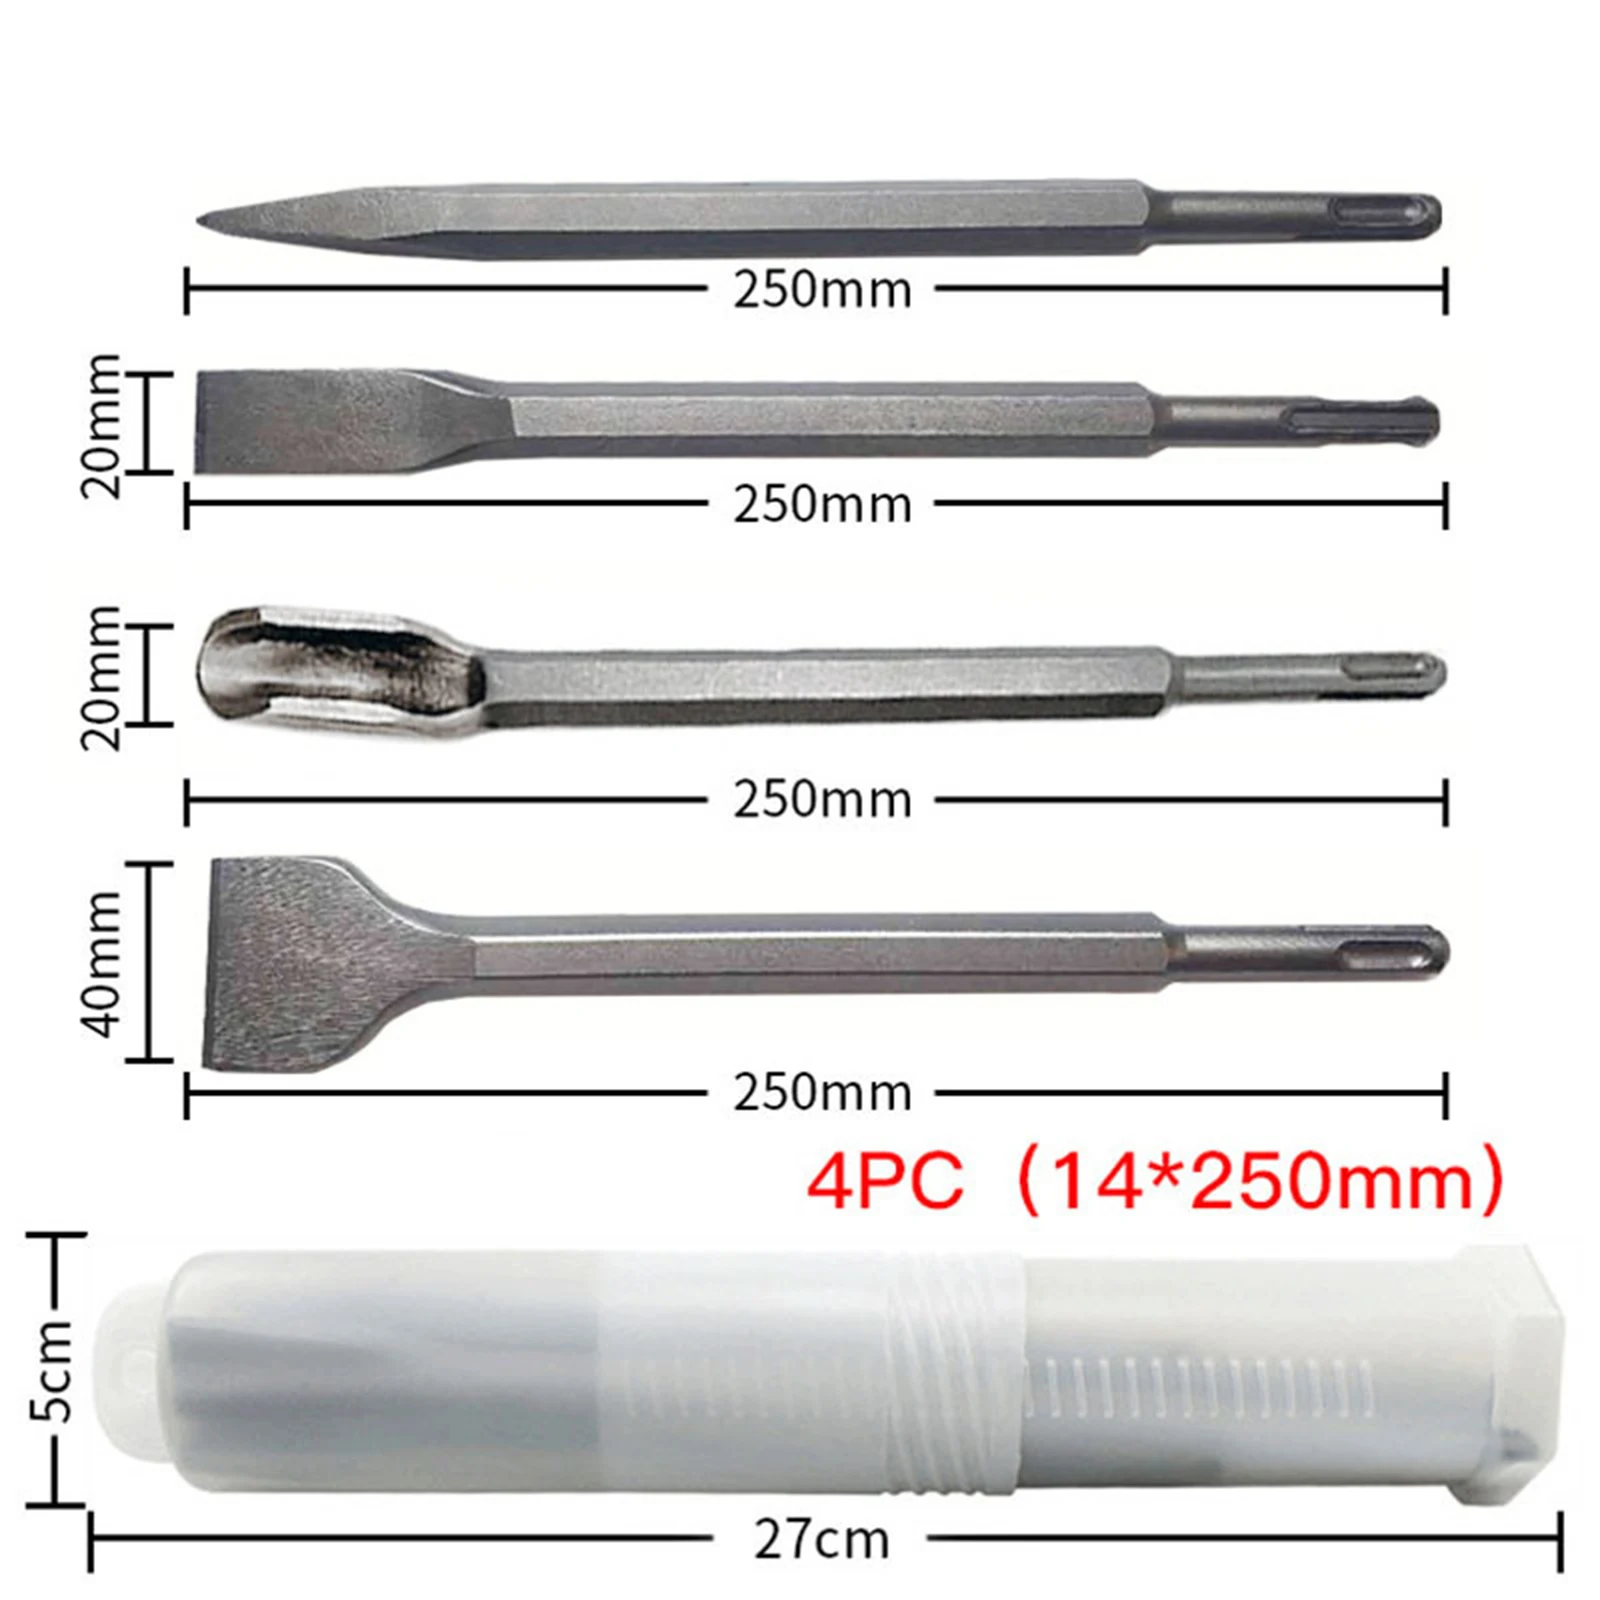 4Pcs Electric Hammer Chisel Set SDS Plus Shank Drill Bit Point Groove Flat Chisel Masonry Tools For Concrete Brick Wall Rock